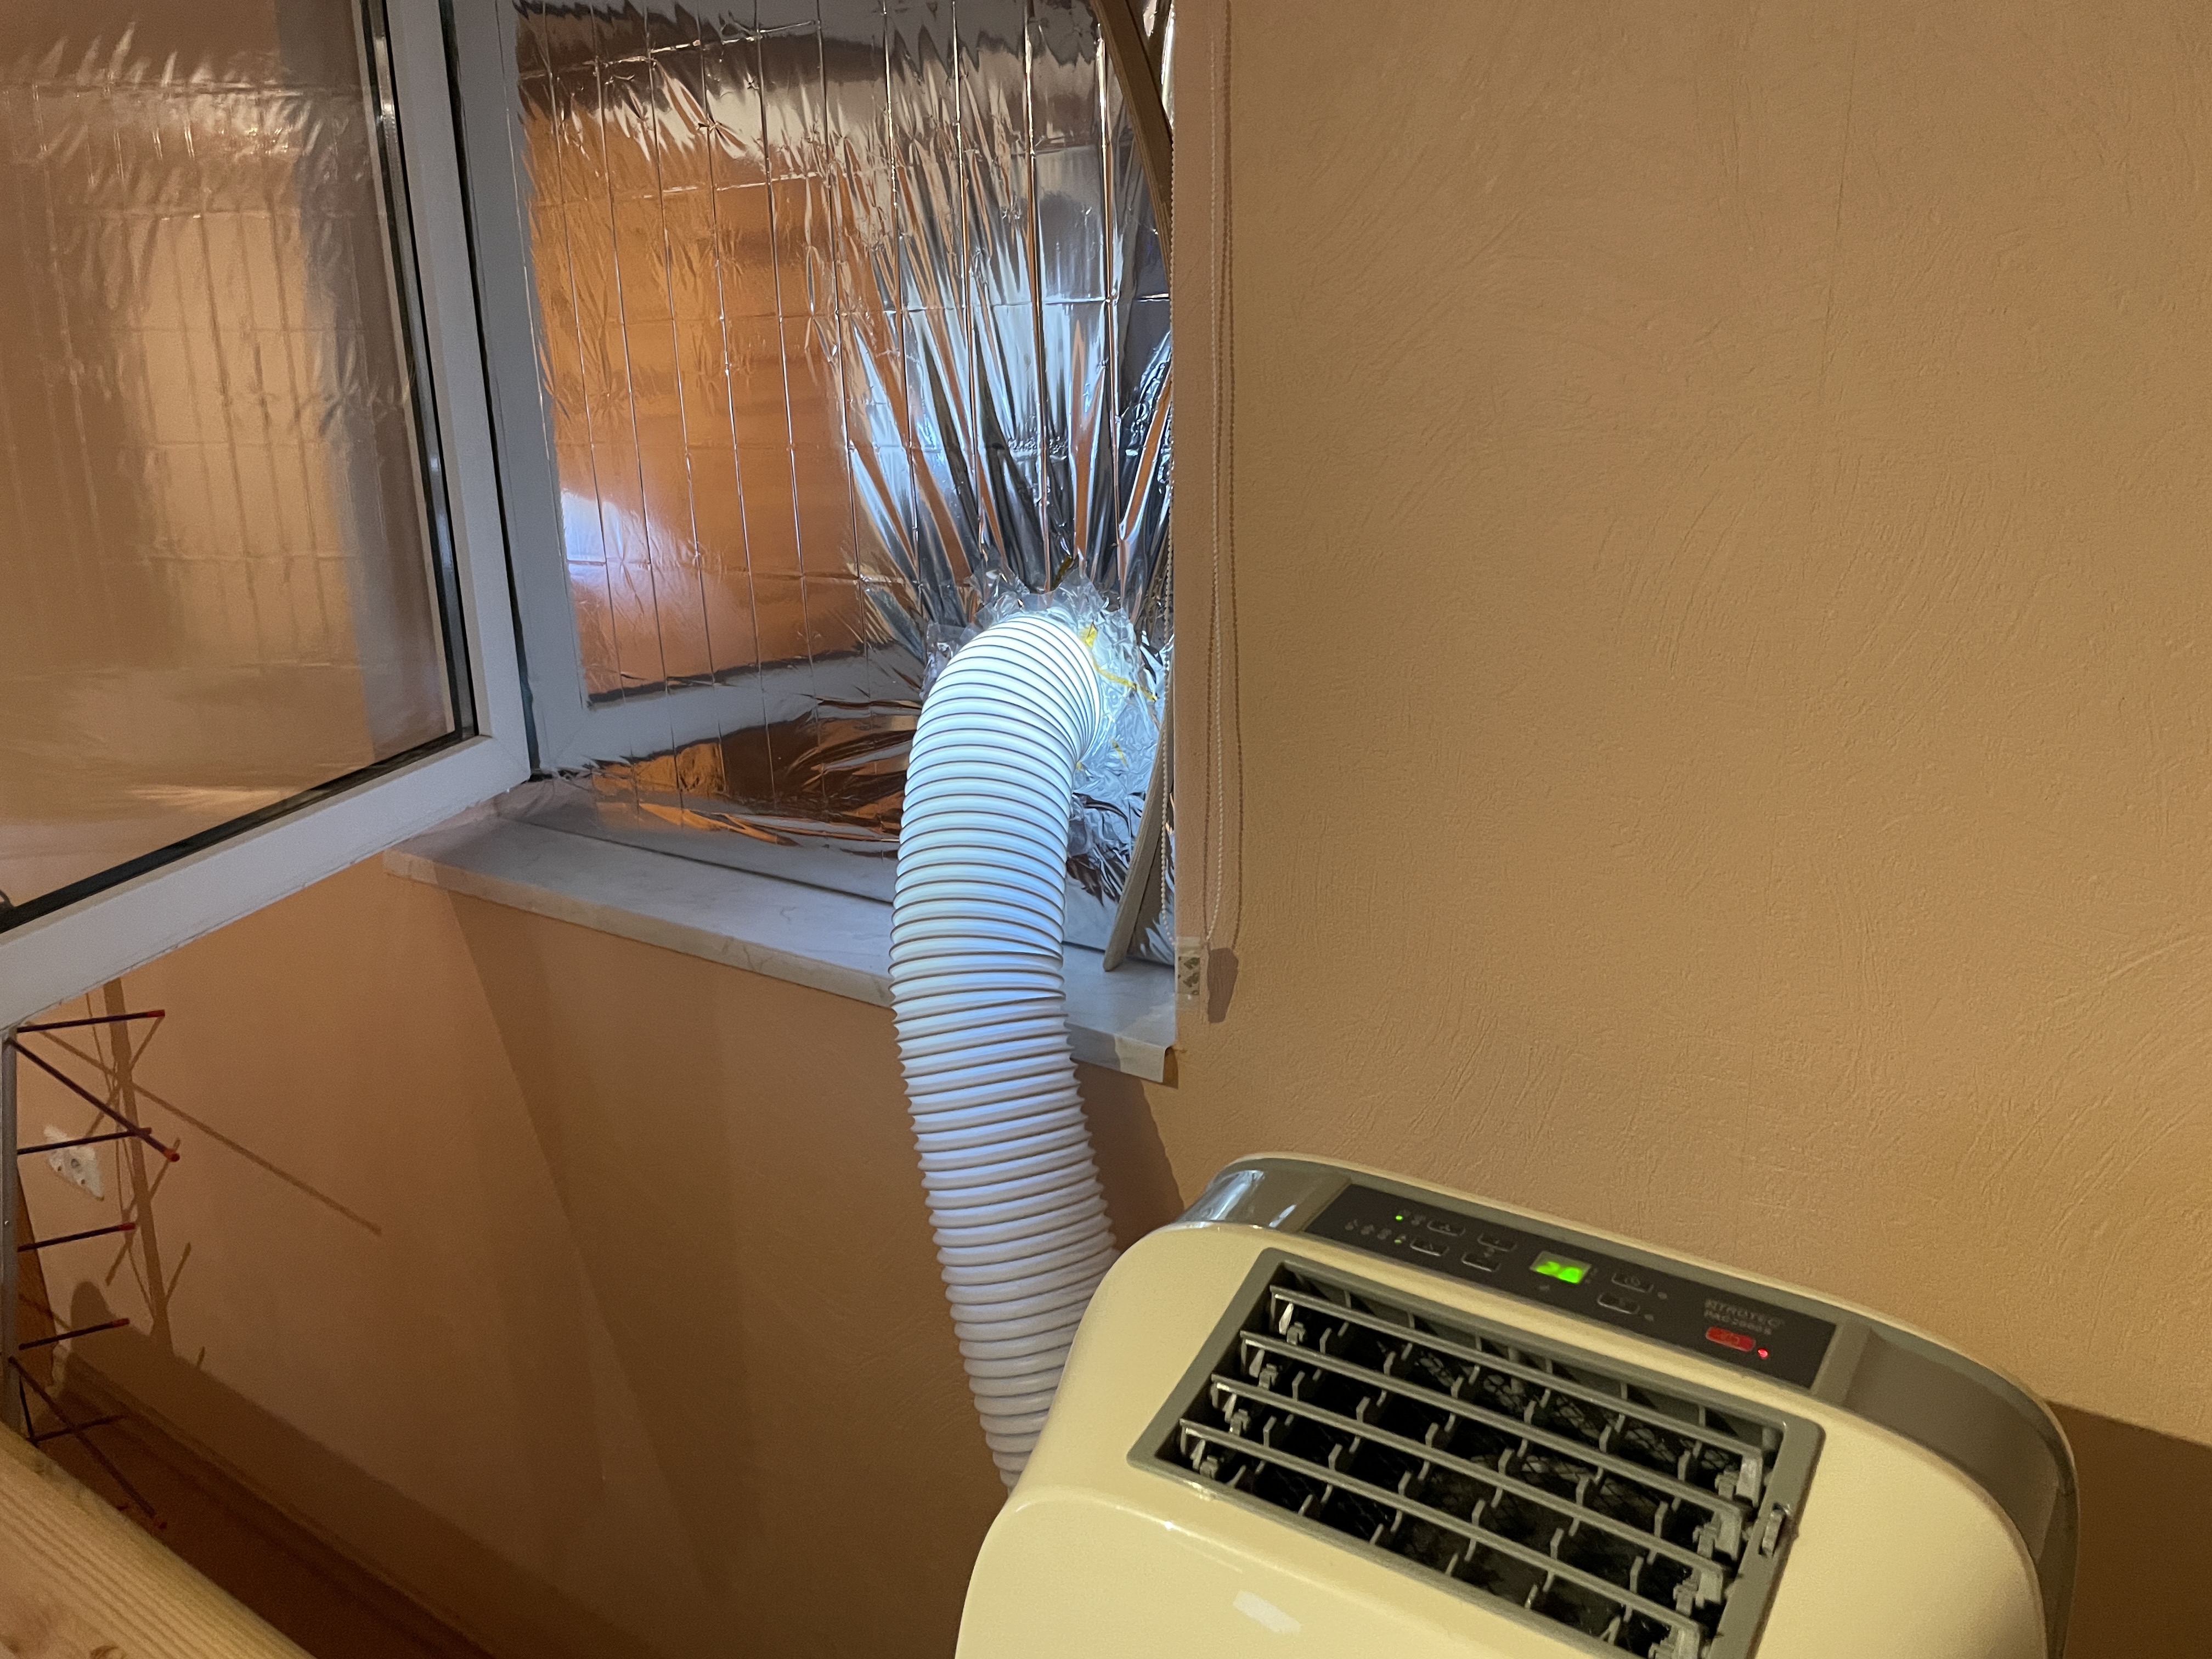 A/C unit connected to a window using a hose